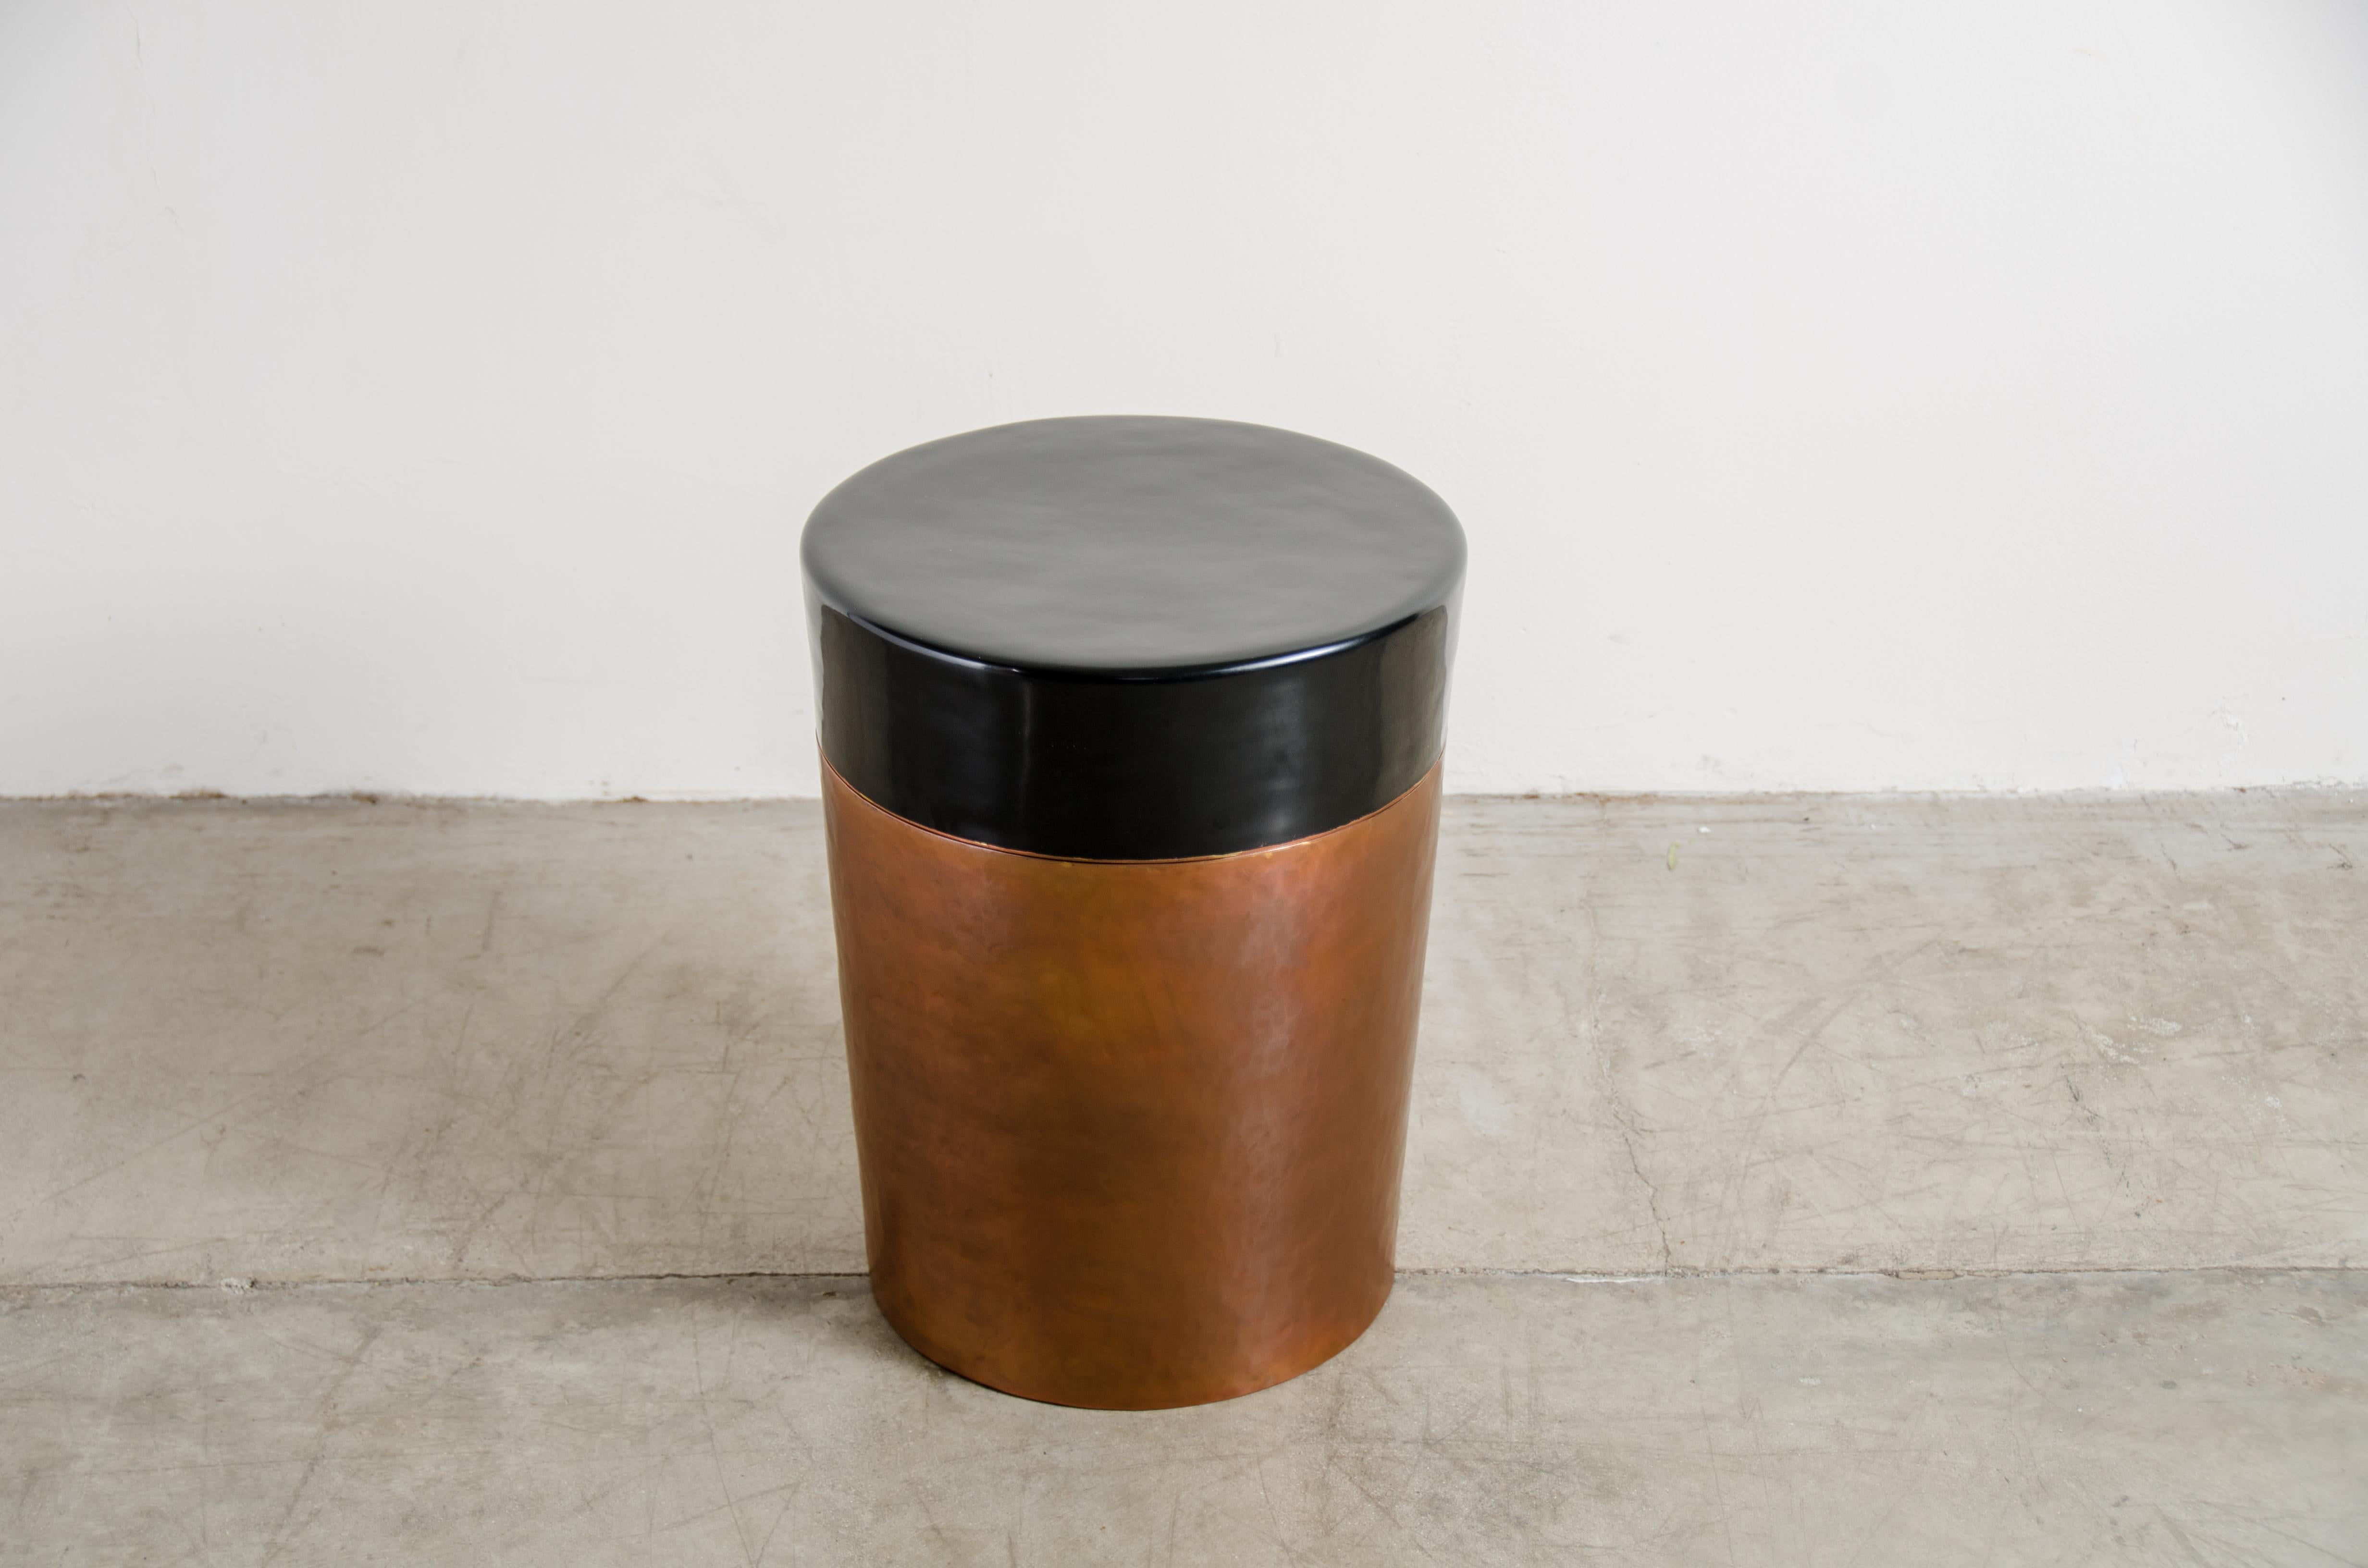 Cylindrical storage Drumstool
Antique copper
Black lacquer
Hand repousse
Limited Edition
Each piece is individually crafted and is unique.

Repousse´ is the traditional art of hand-hammering decorative relief onto sheet metal. The technique